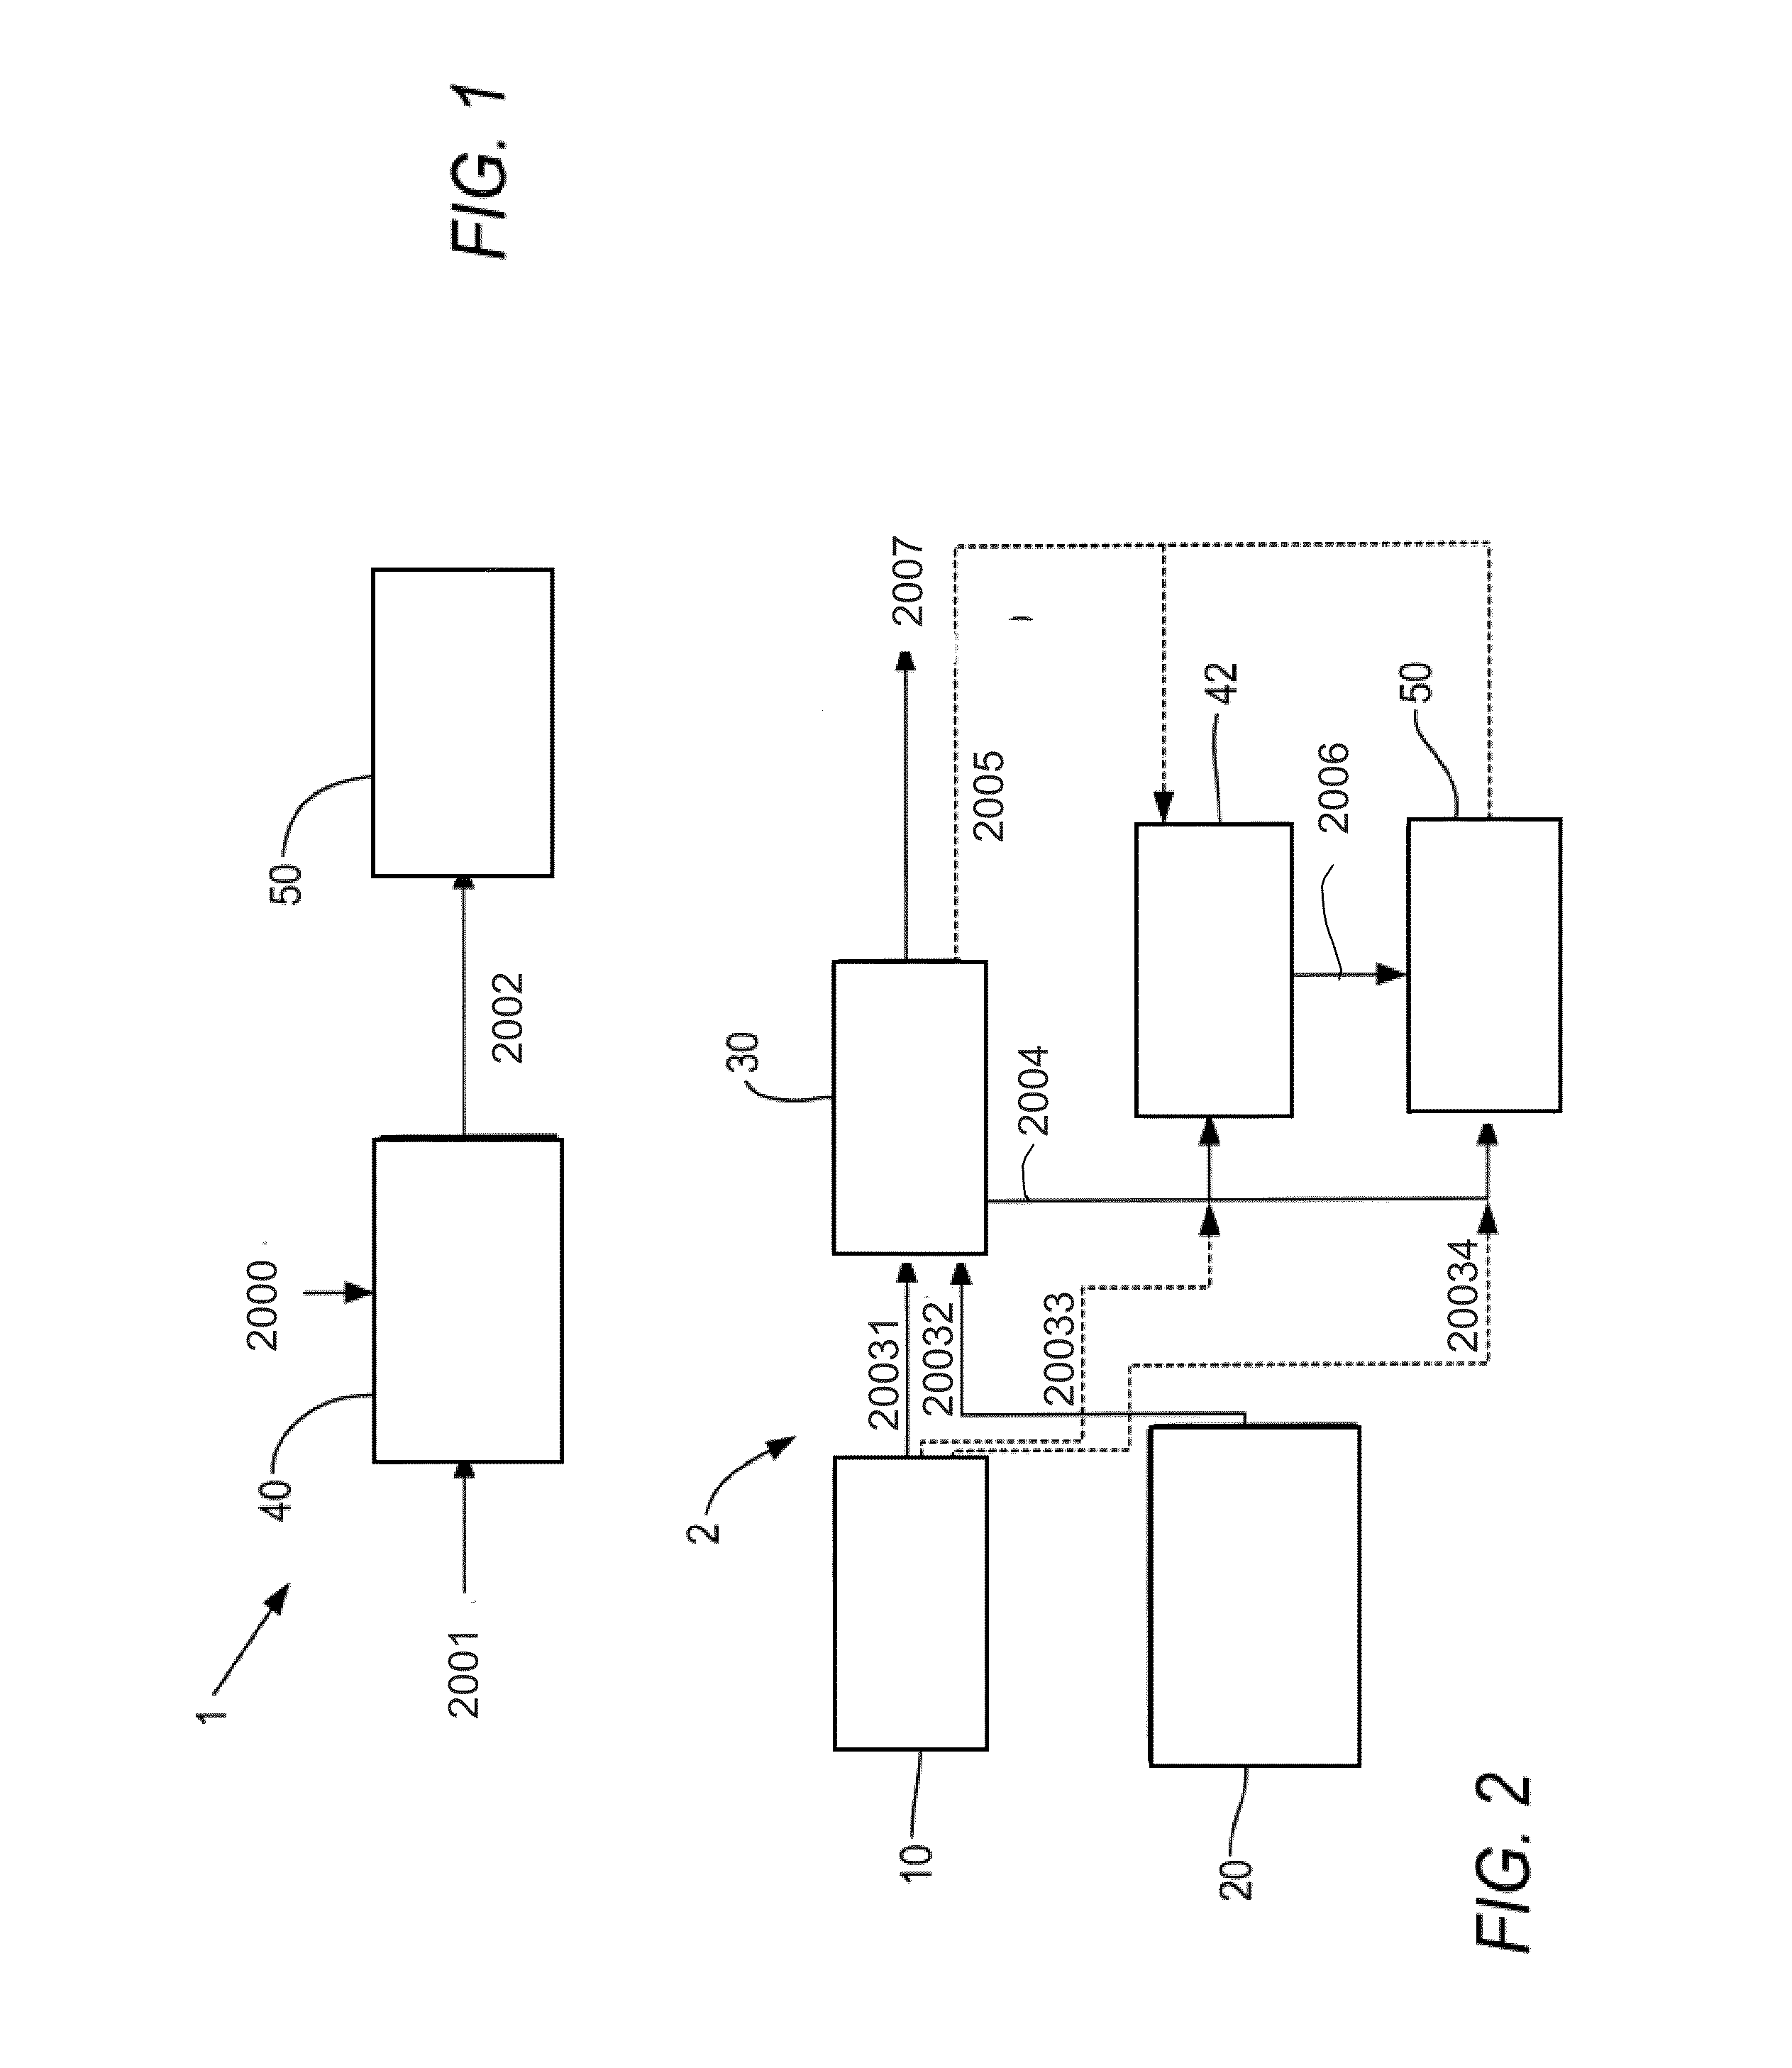 System and method for carbon dioxide capture and sequestration